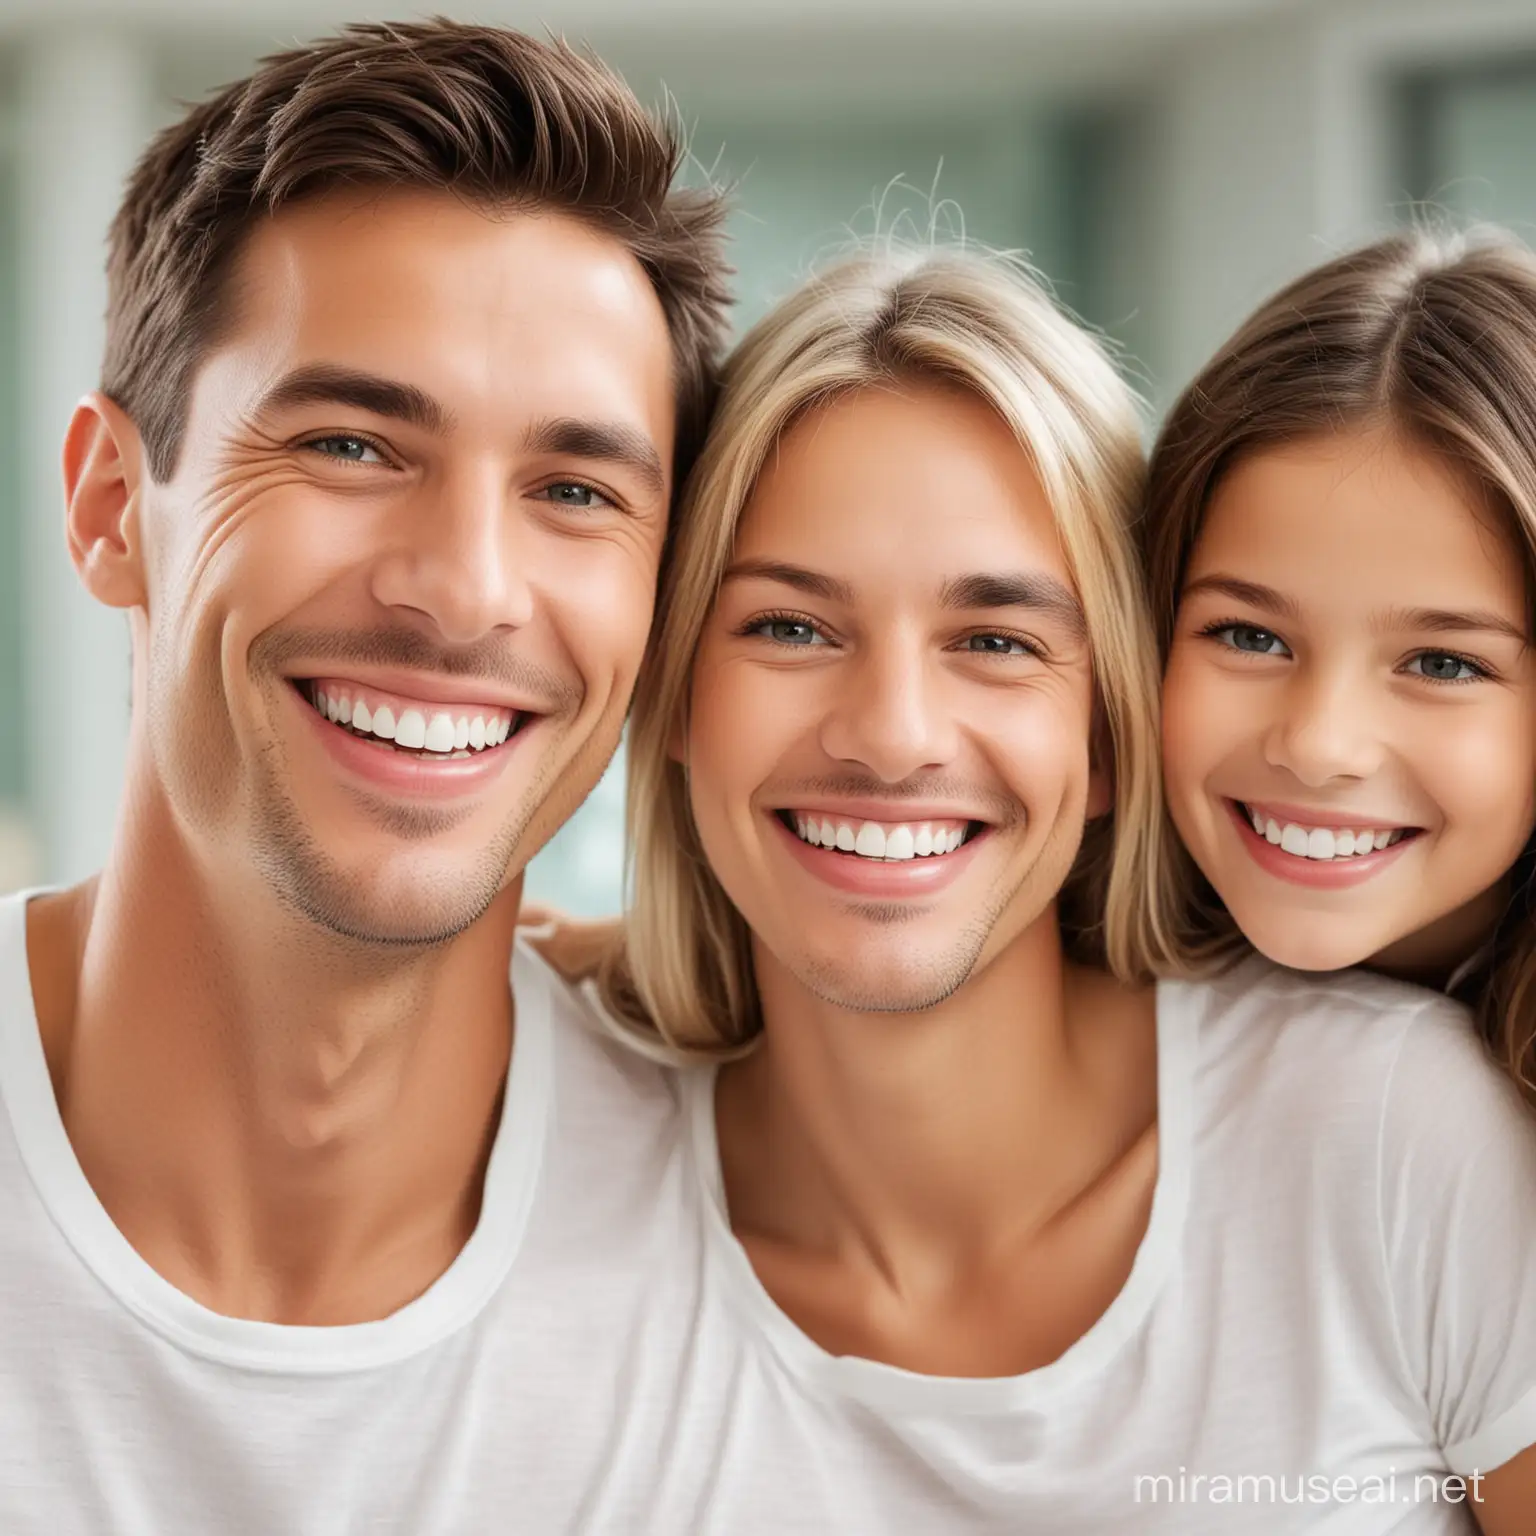 The family is smiling happily, teeth are very white
